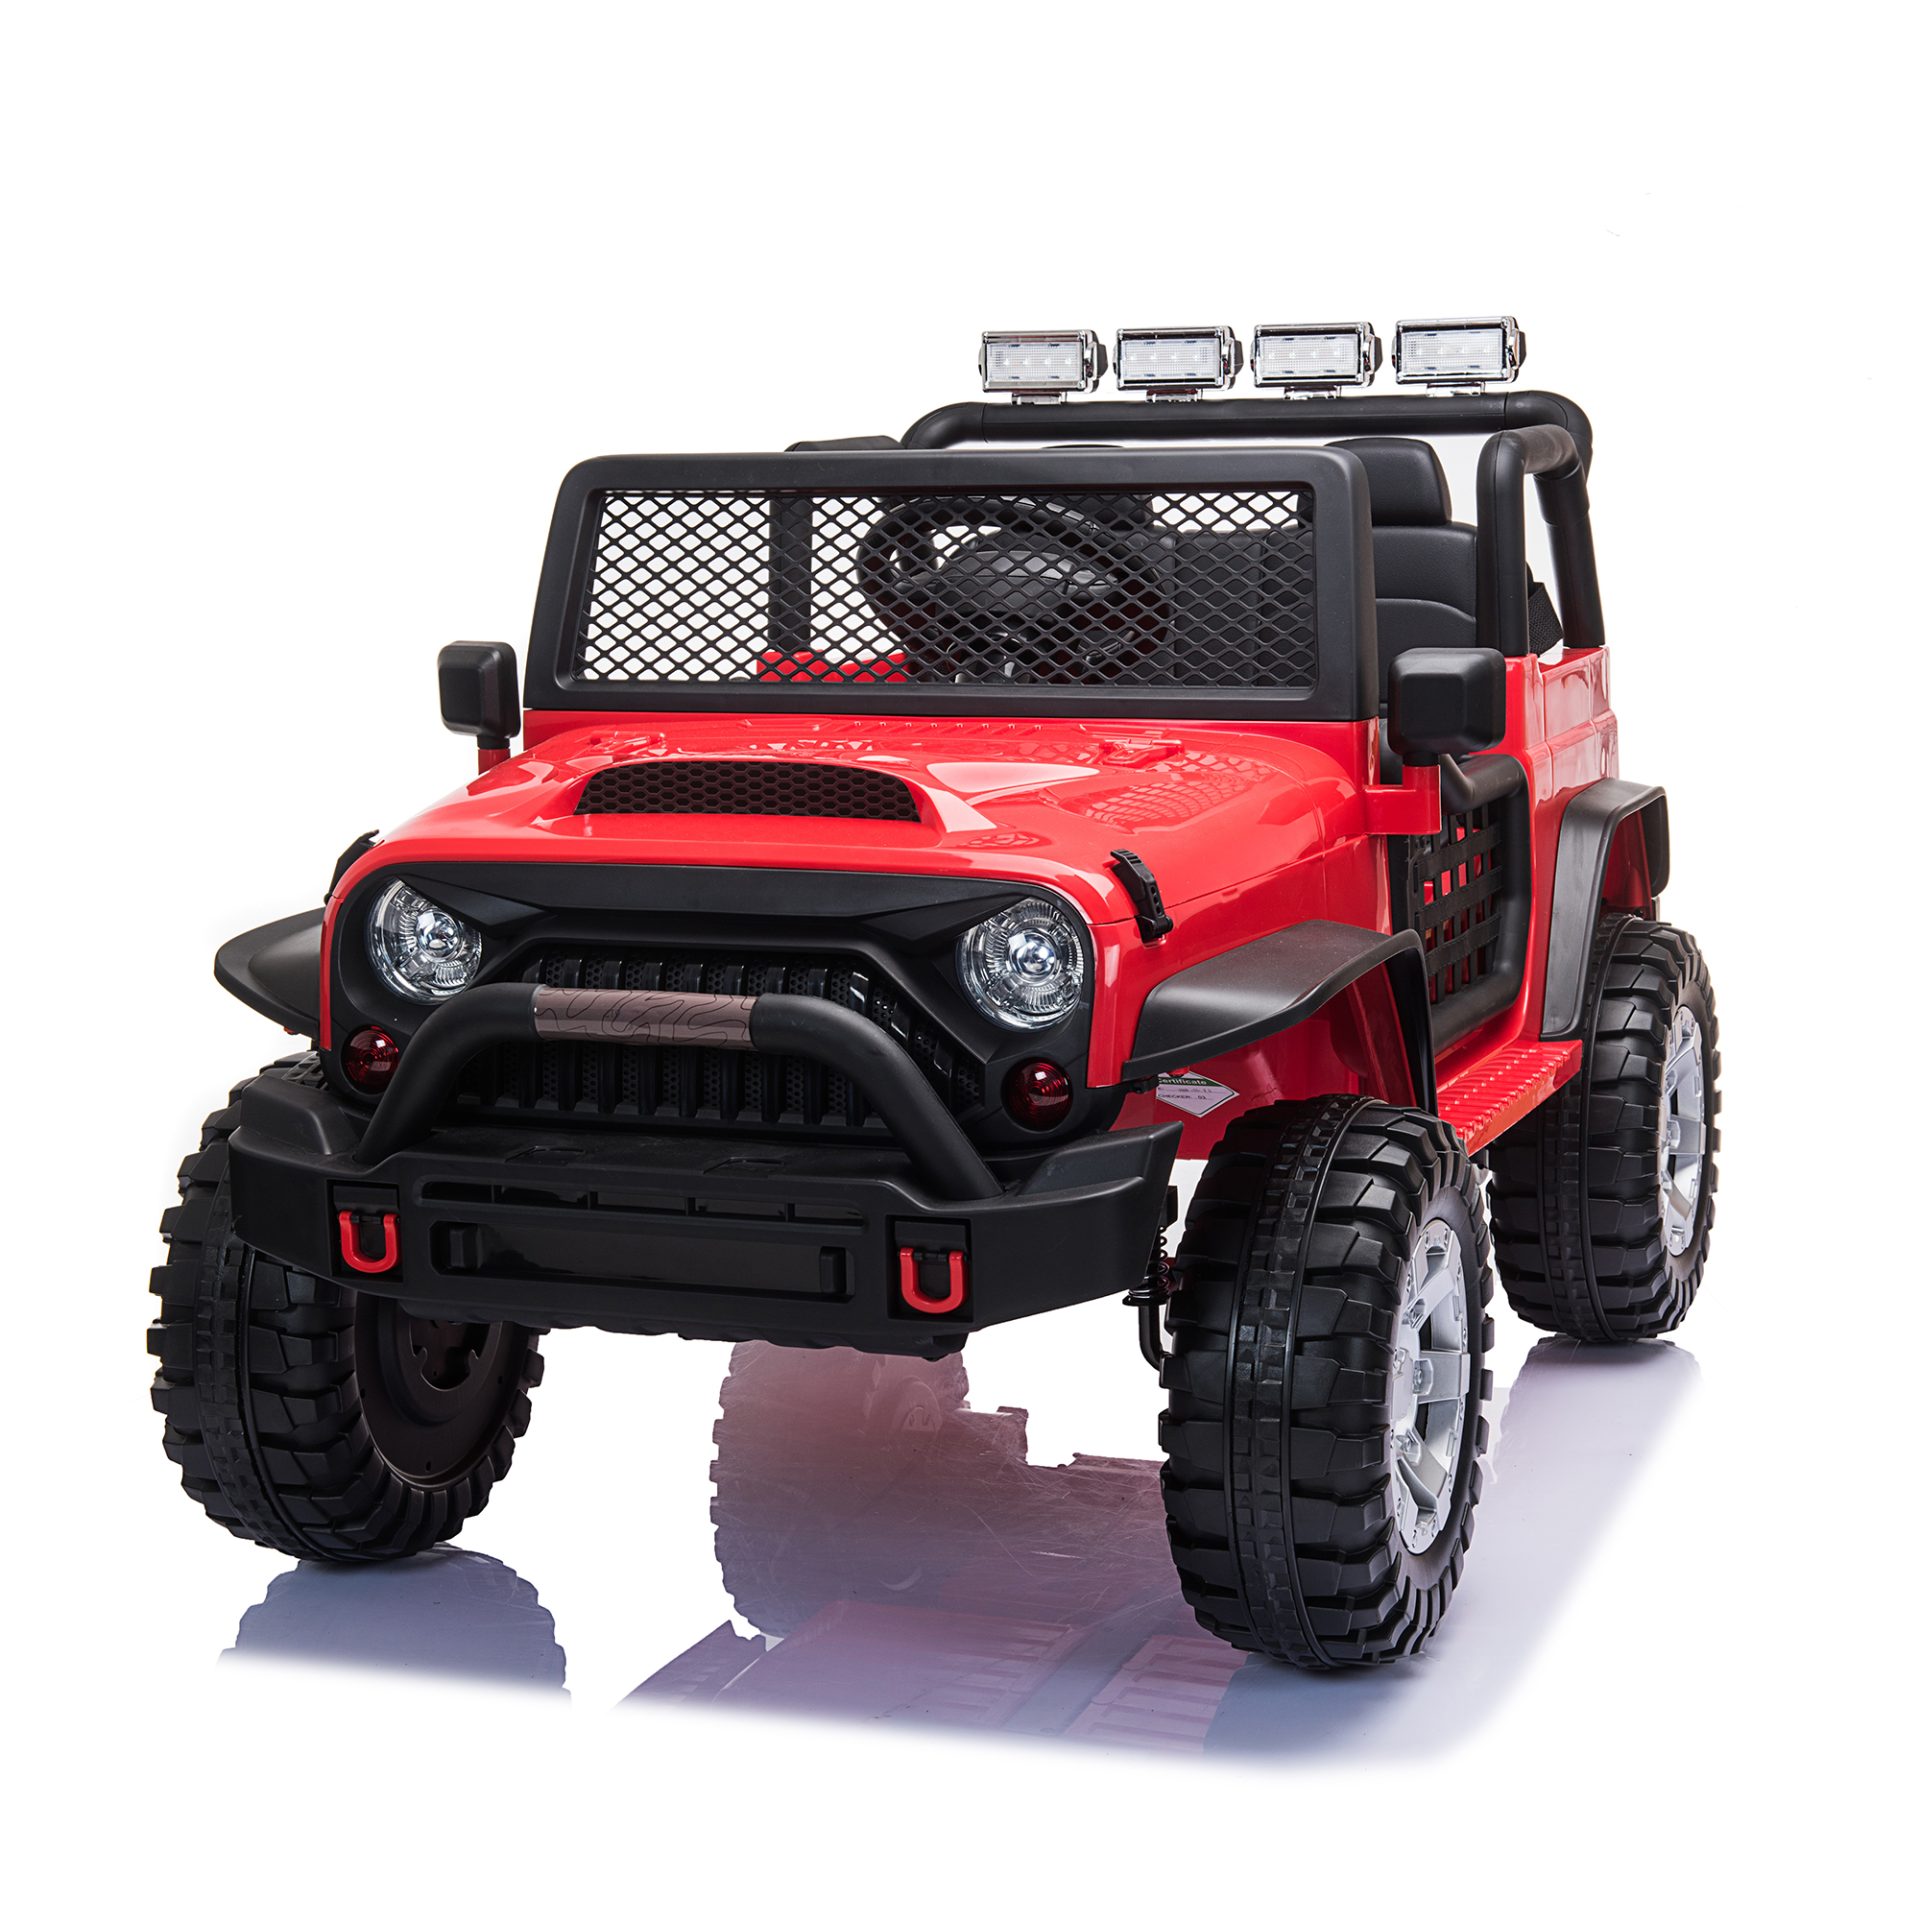 Tobbi 12V Ride On Truck Toy w/ Remote Control& Bluetooth, Red TH17T0836 1 scaled